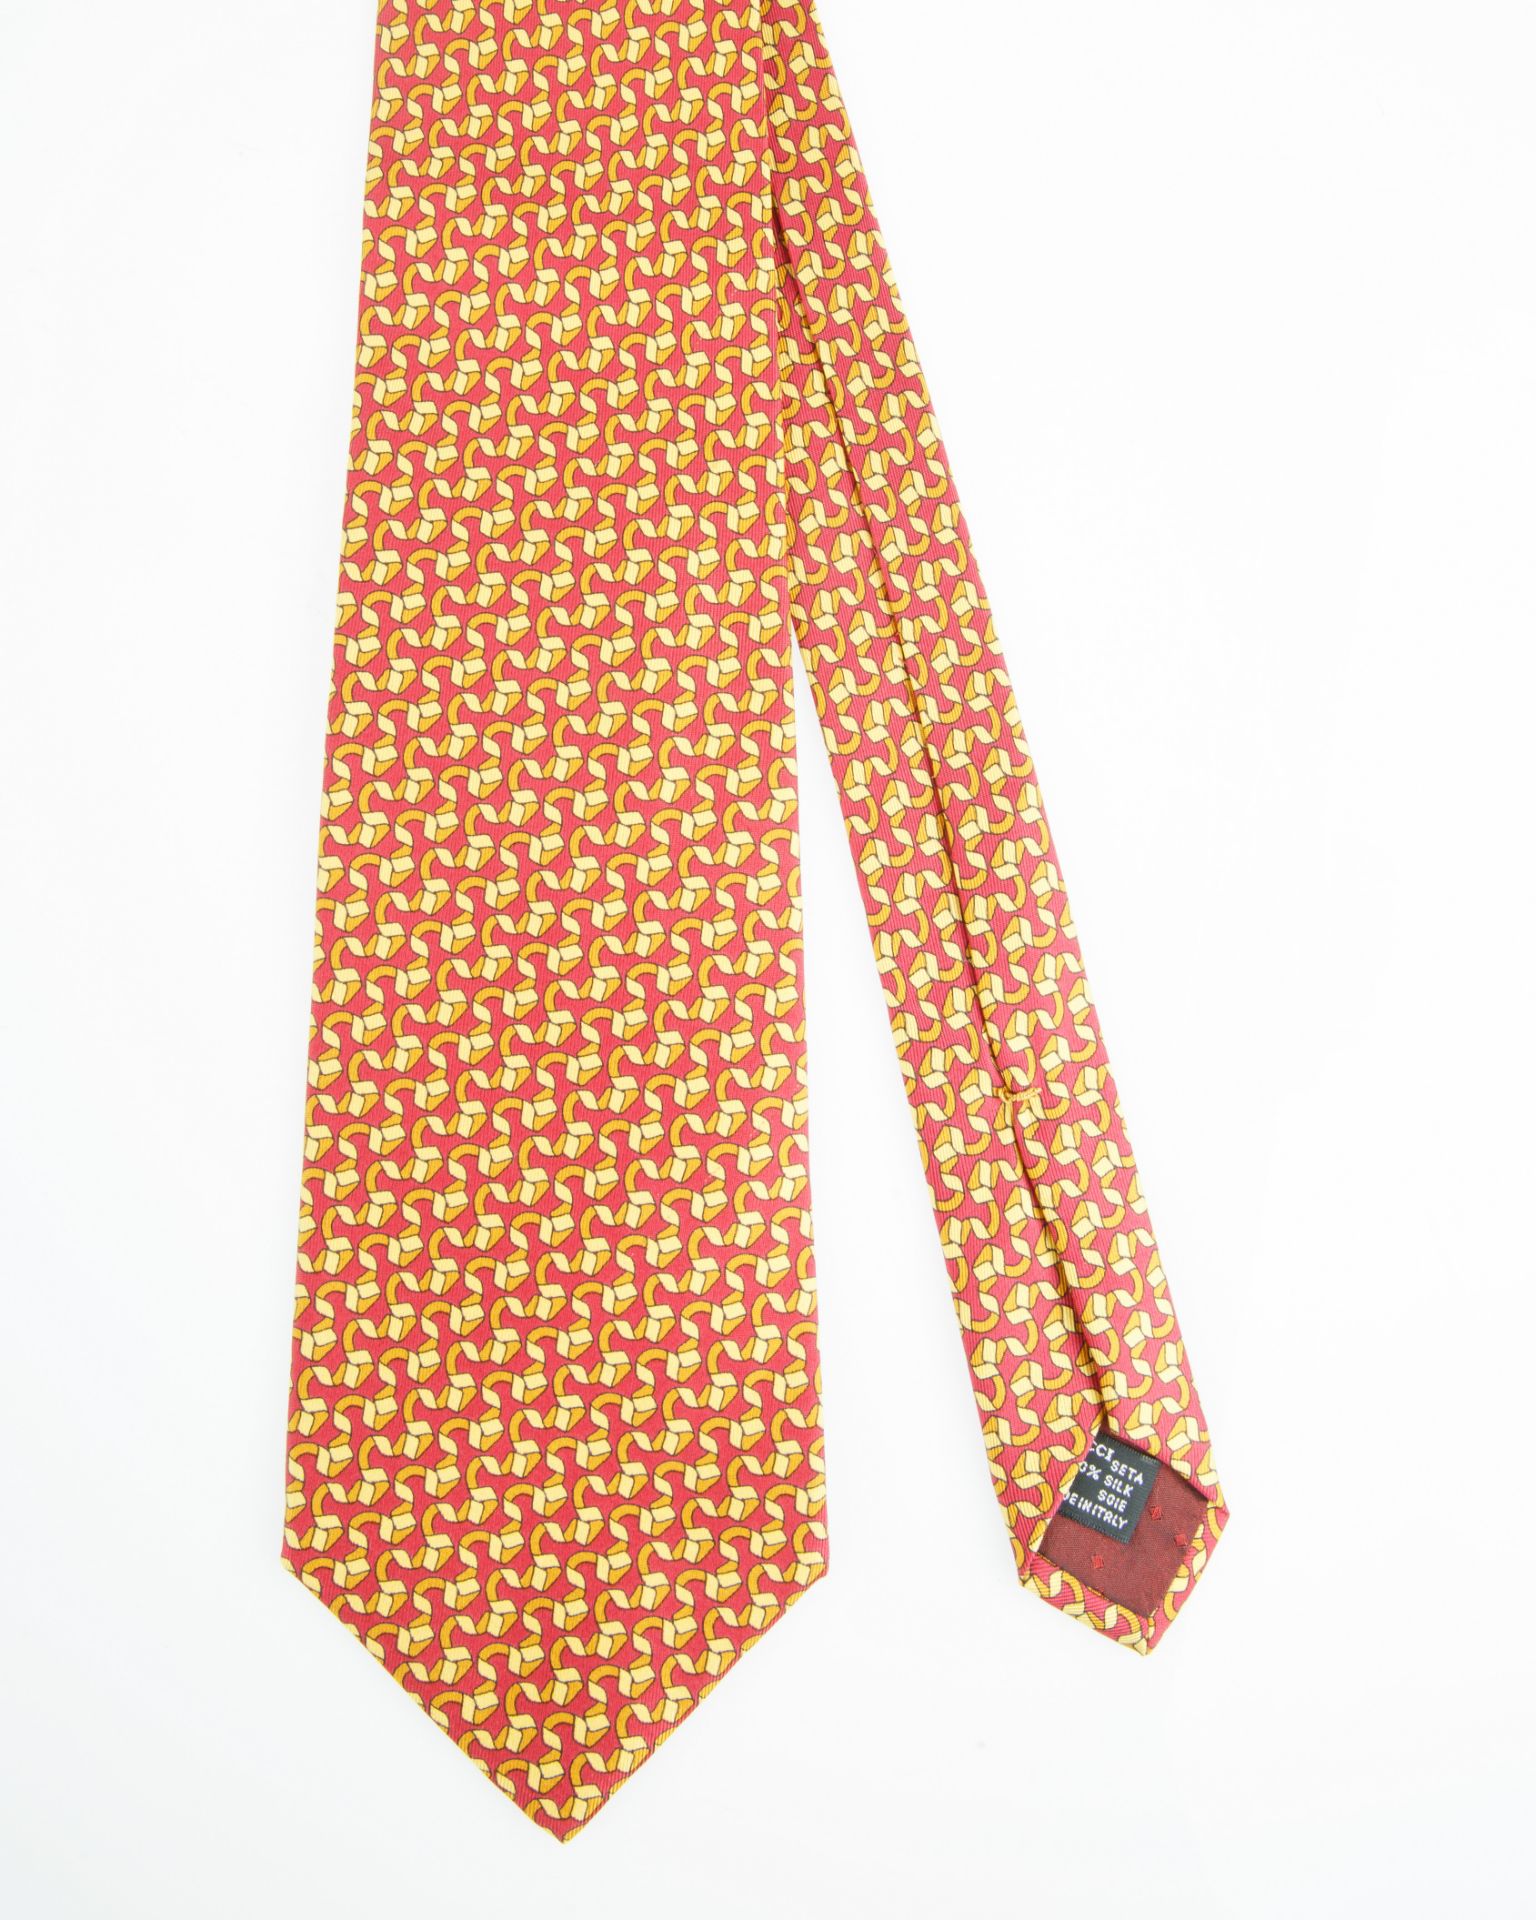 GROUP OF SEVEN GUCCI TIES - Image 8 of 15